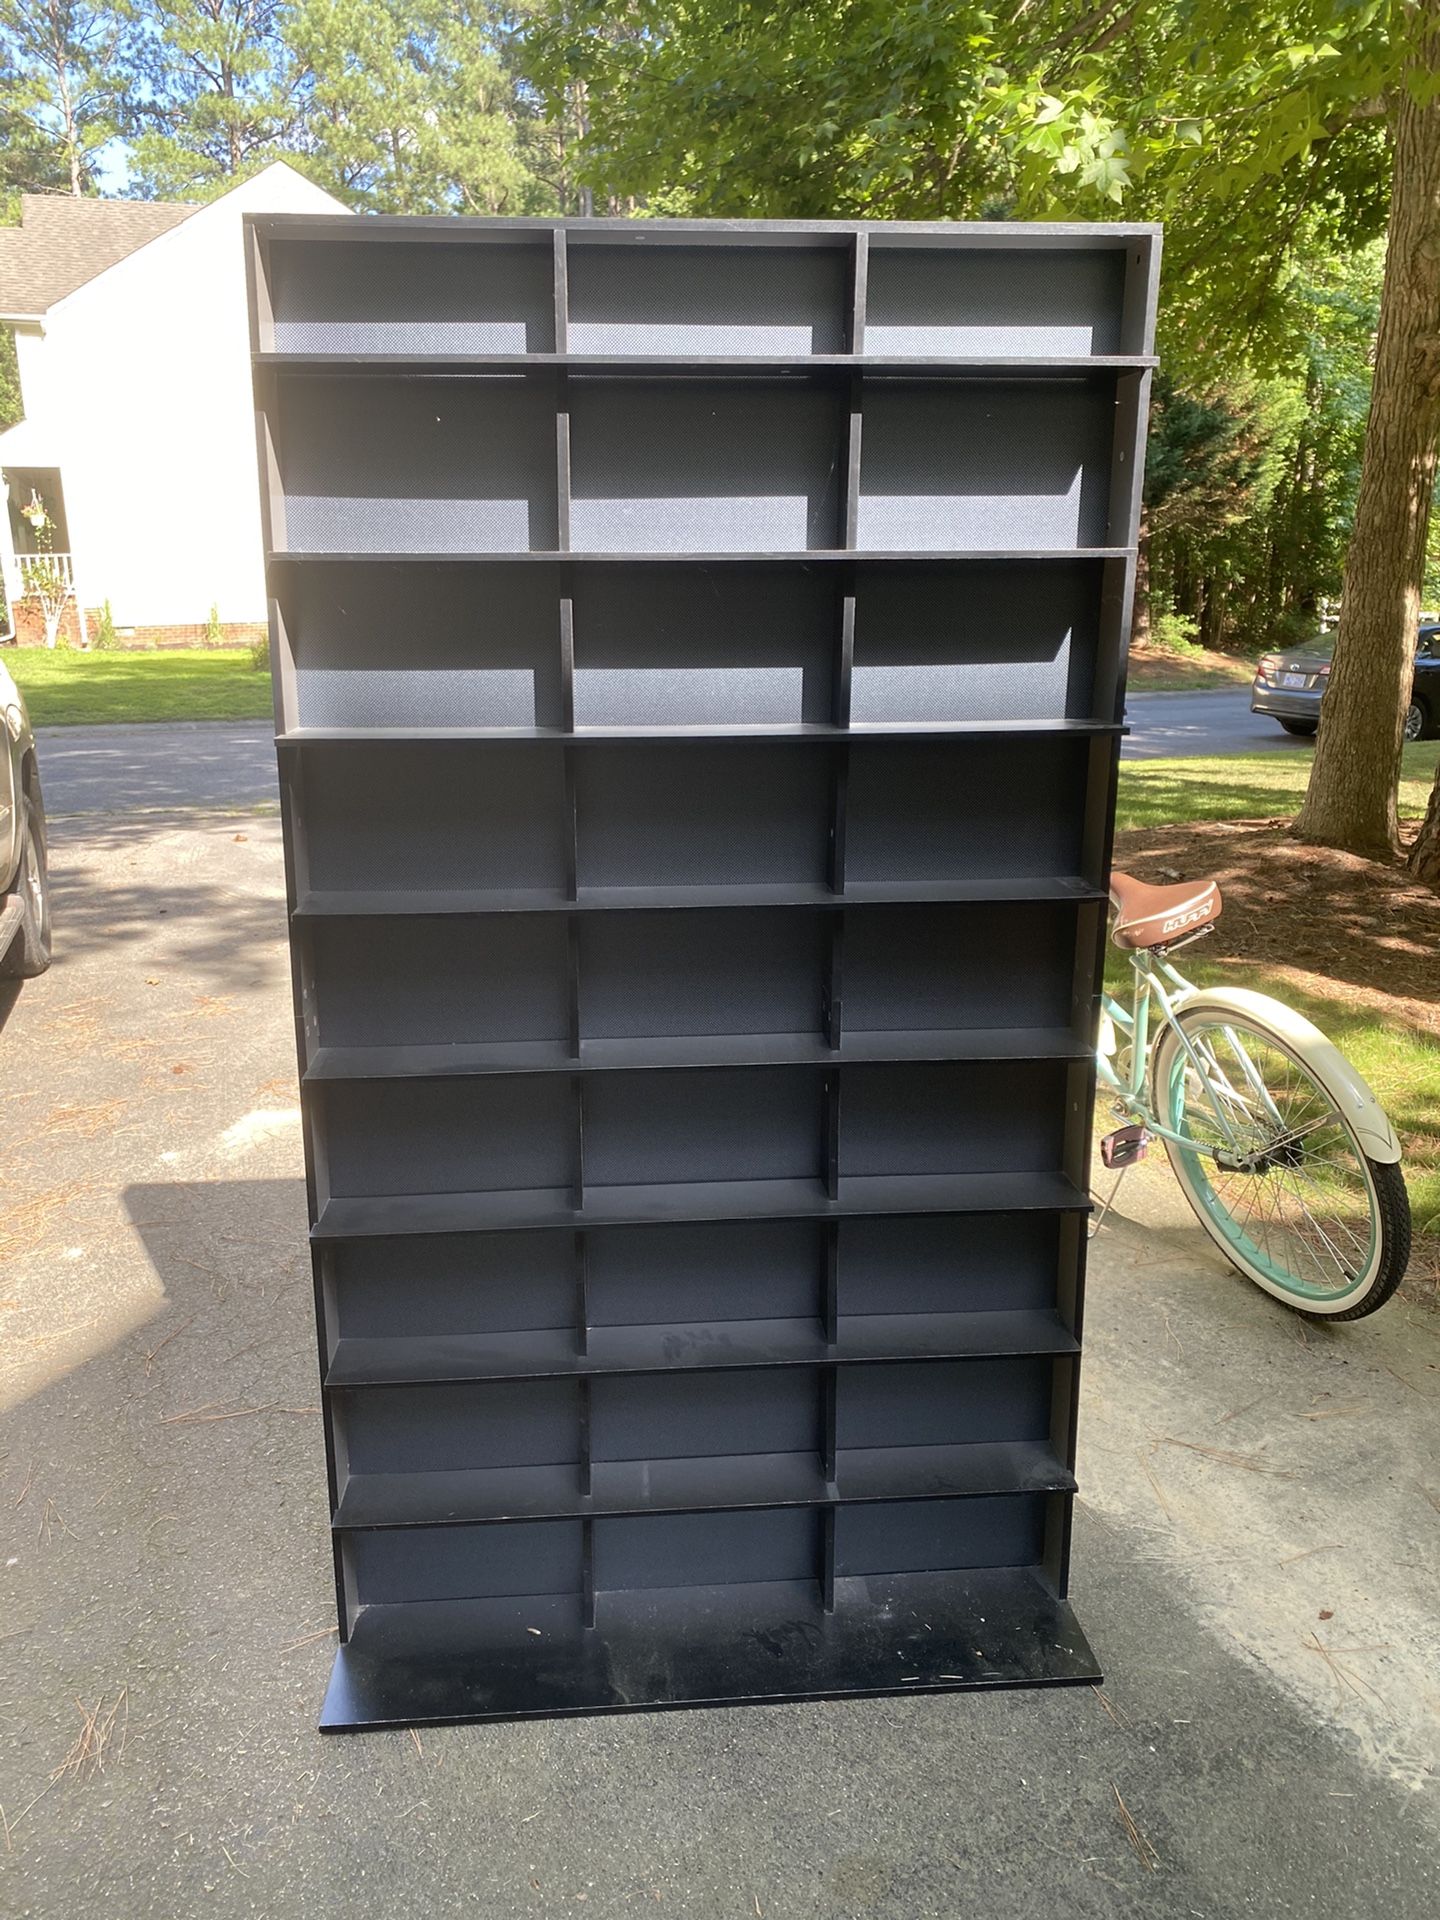 144 DVD and CD rack in black and silver